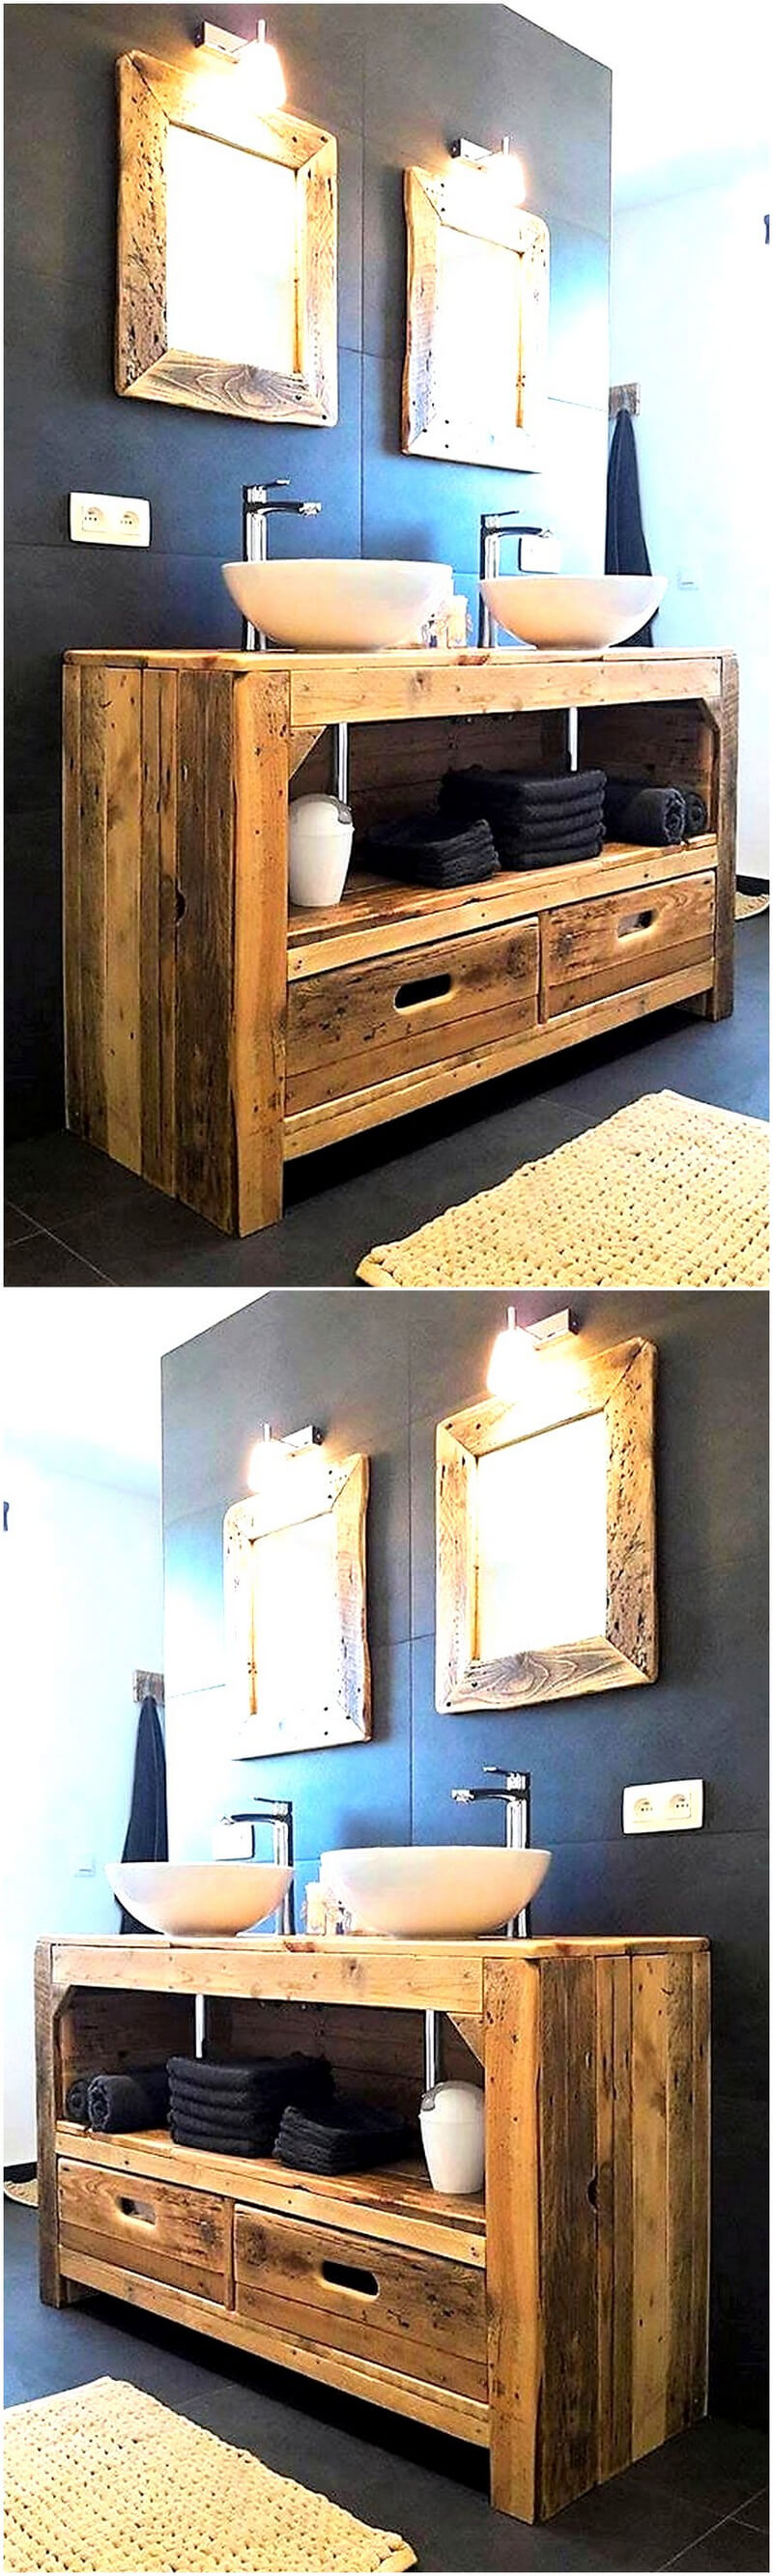 rustic sink plan with pallets